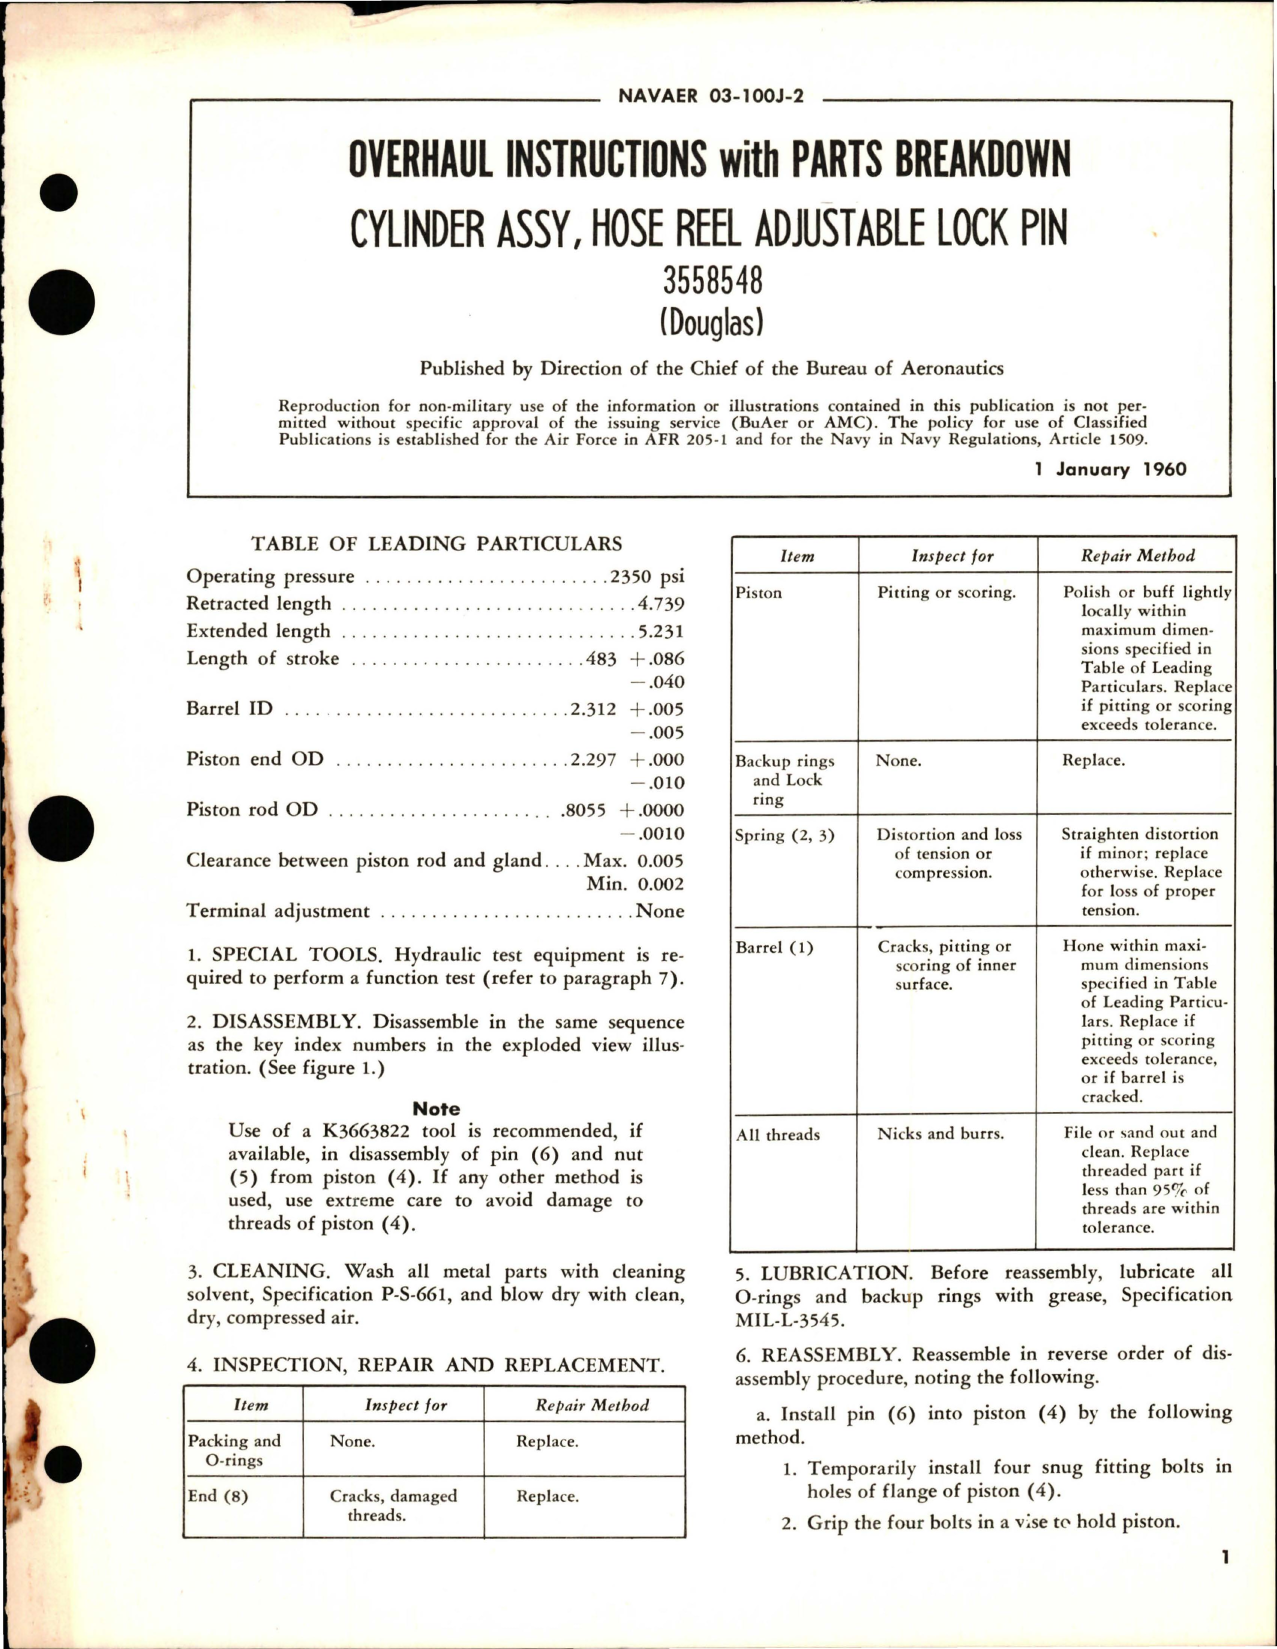 Sample page 1 from AirCorps Library document: Overhaul Instructions with Parts Breakdown for Hose Reel Adjustable Lock Pin Cylinder Assembly - 3558548 